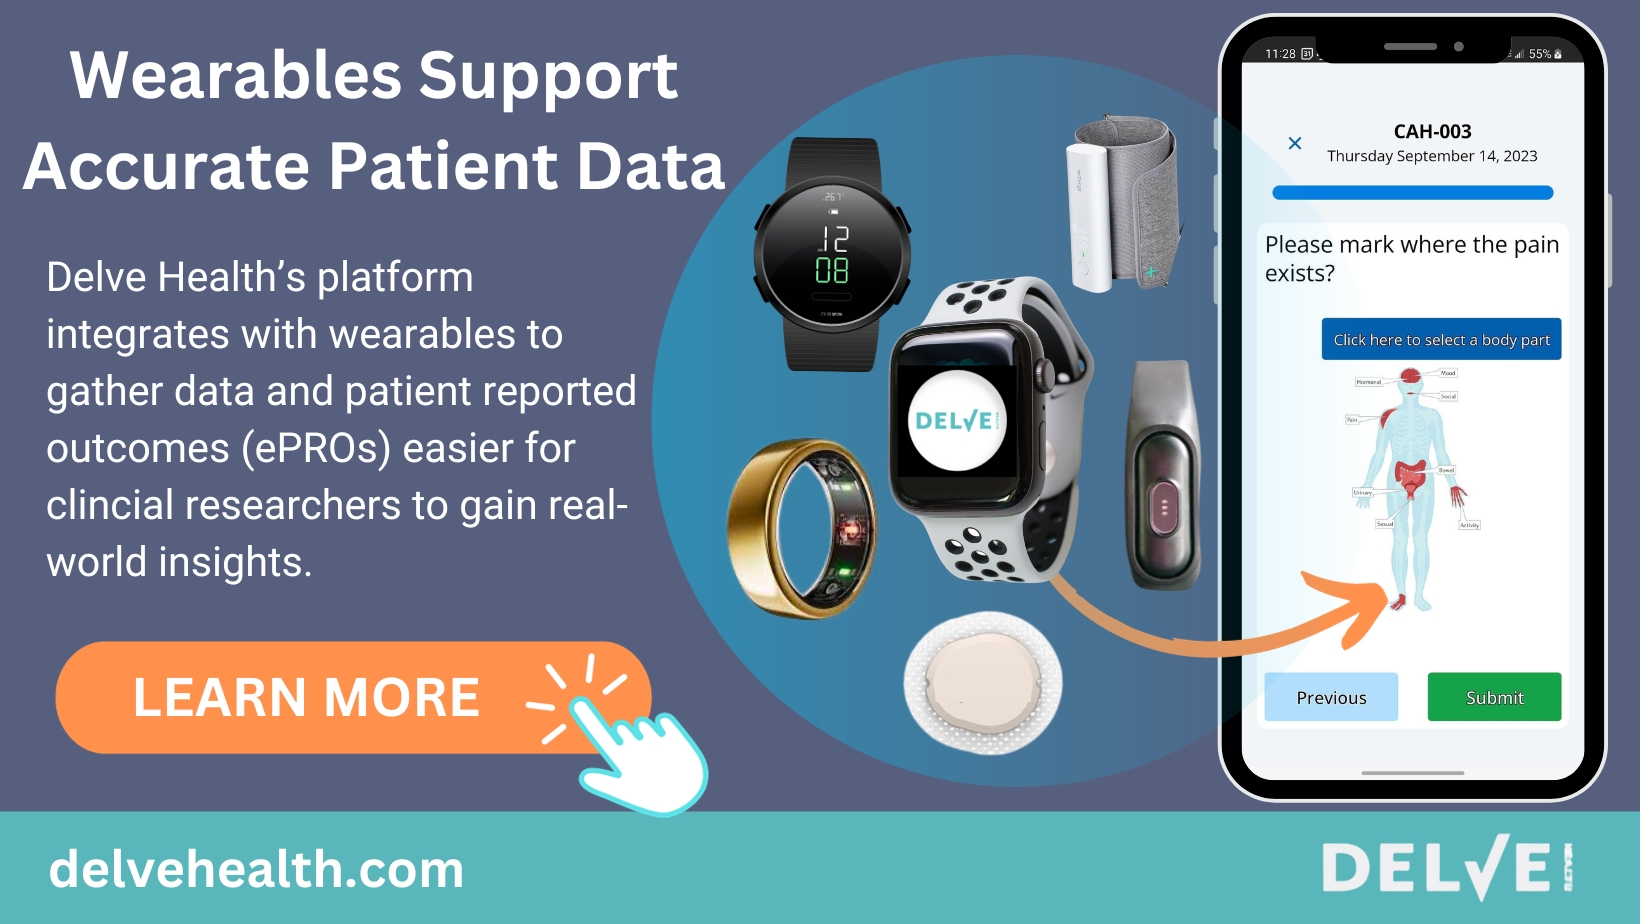 Wearables support accurate patient reported outcomes (ePROs).